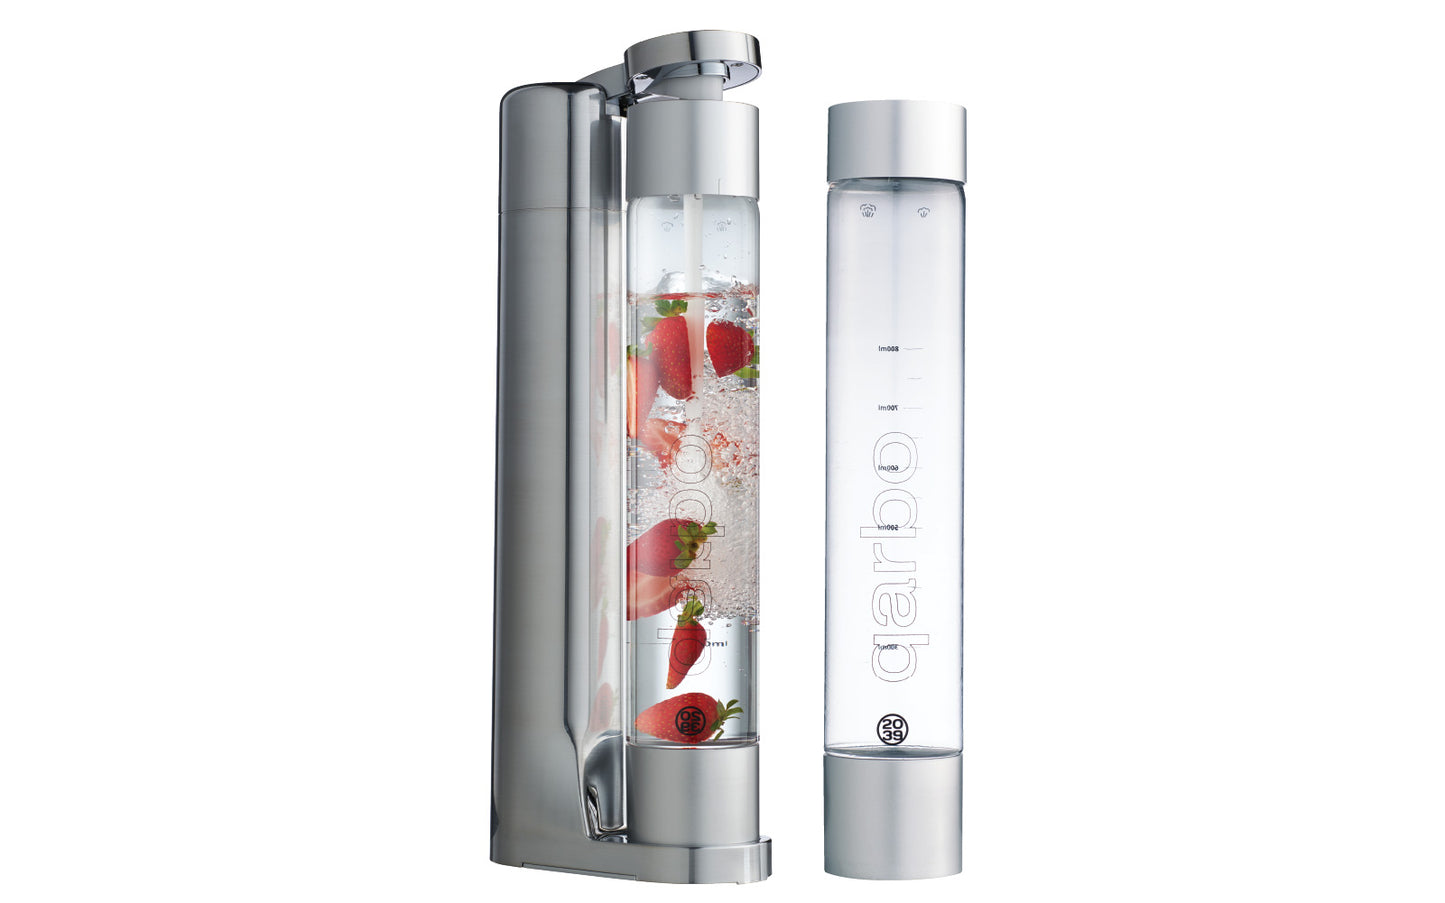 qarbo CLASSIC - Sparkling Water Maker and Fruit Infuser